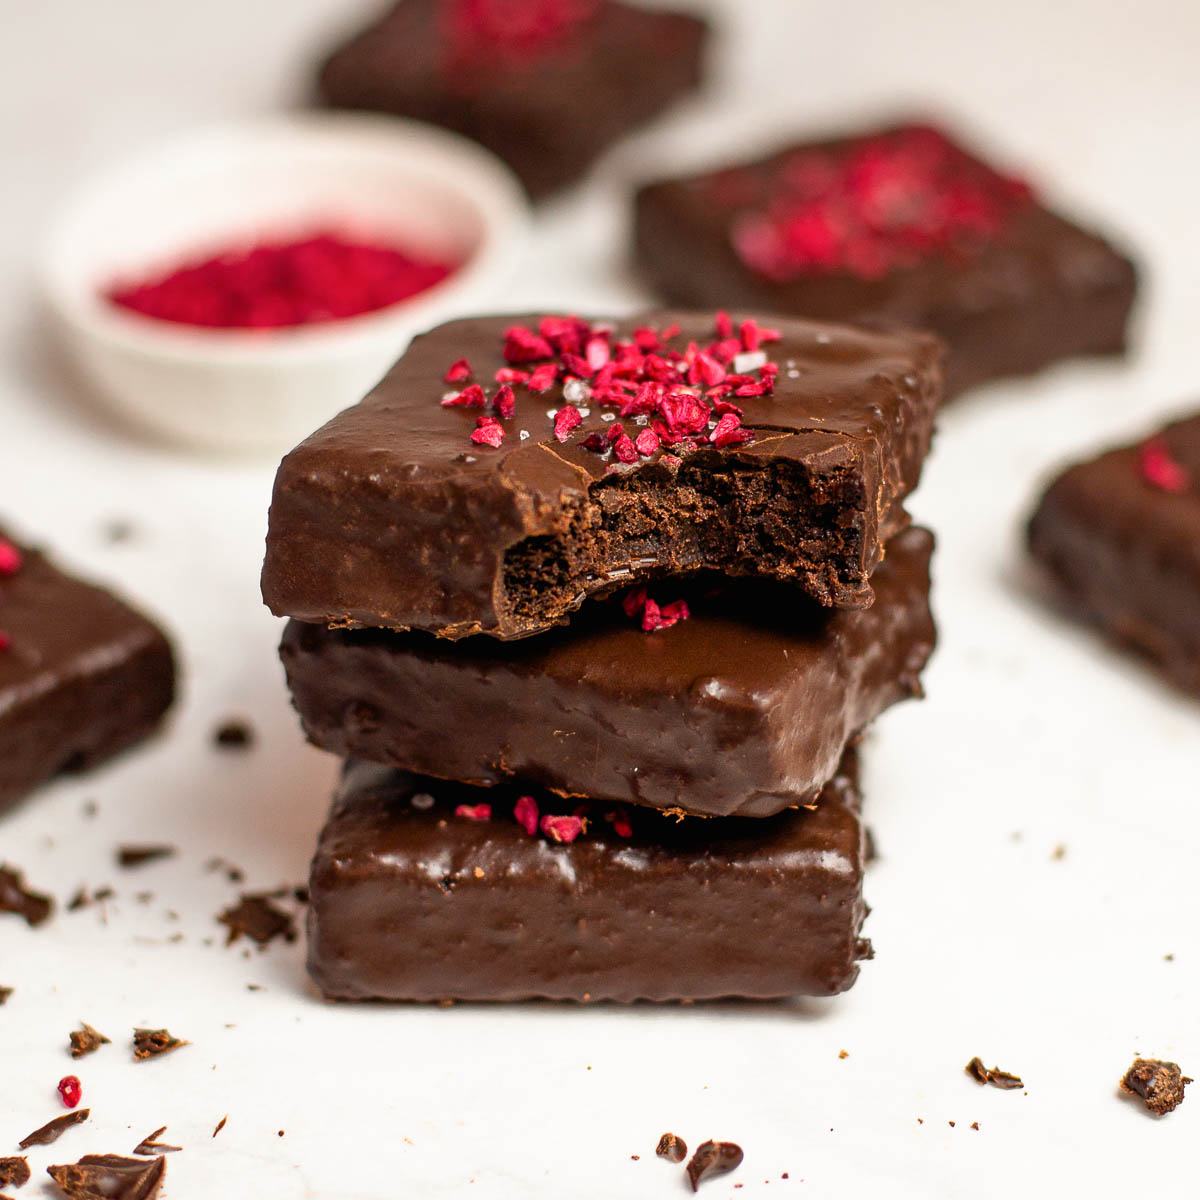 Stack of chocolate-covered brownies with freeze-dried raspberries.